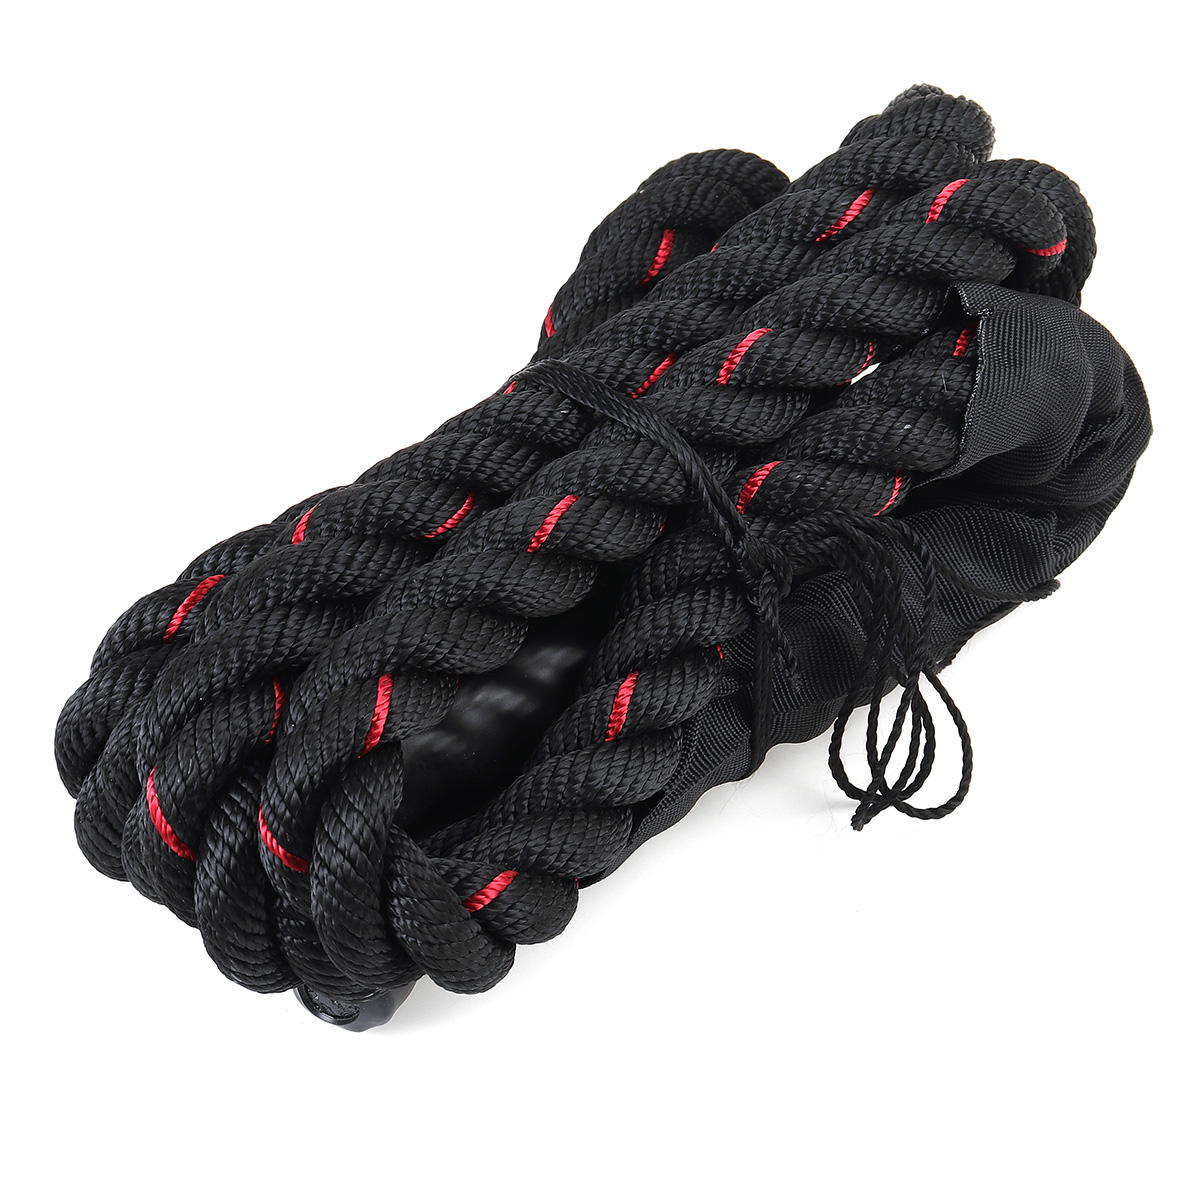 25mm-Heavy-Jump-Rope-Thicken-Weighted-Training-Battle-Skipping-Ropes-Muscle-Power-Training-Gym-Fitne-1706587-2